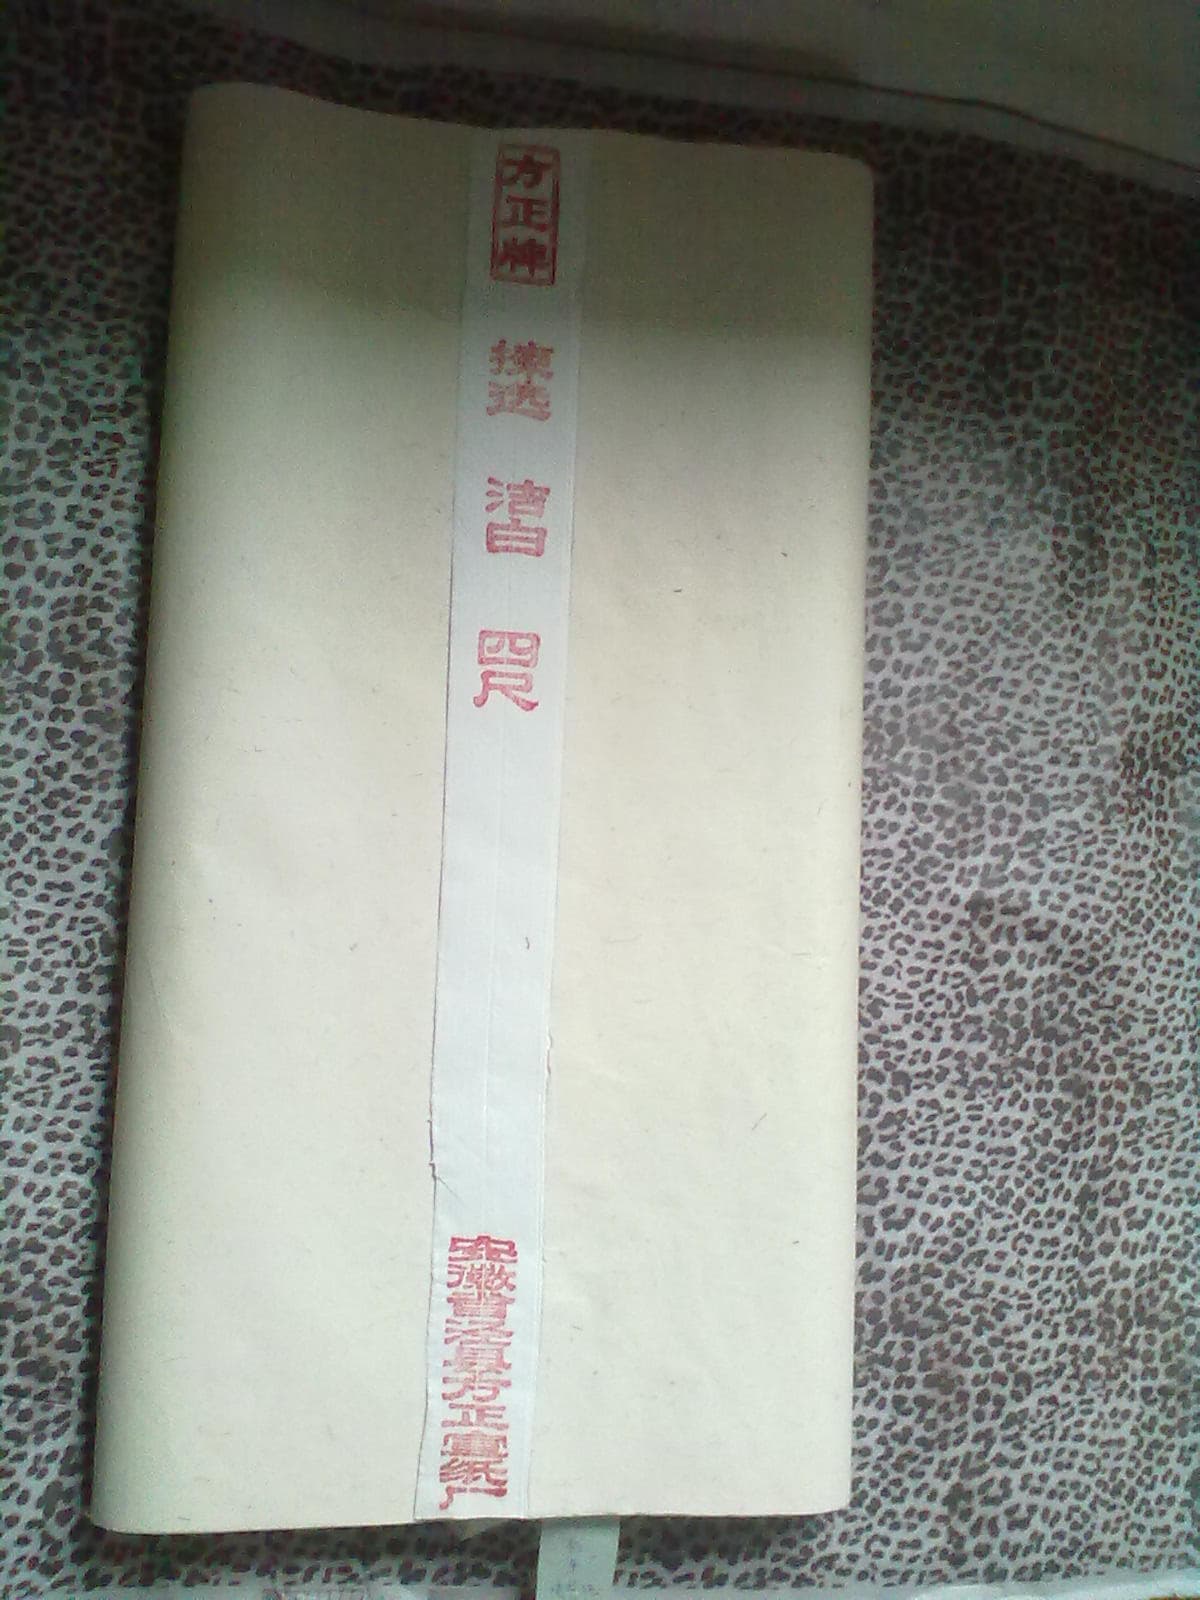 xuan paper (shuen paper ) for painting calligraphy